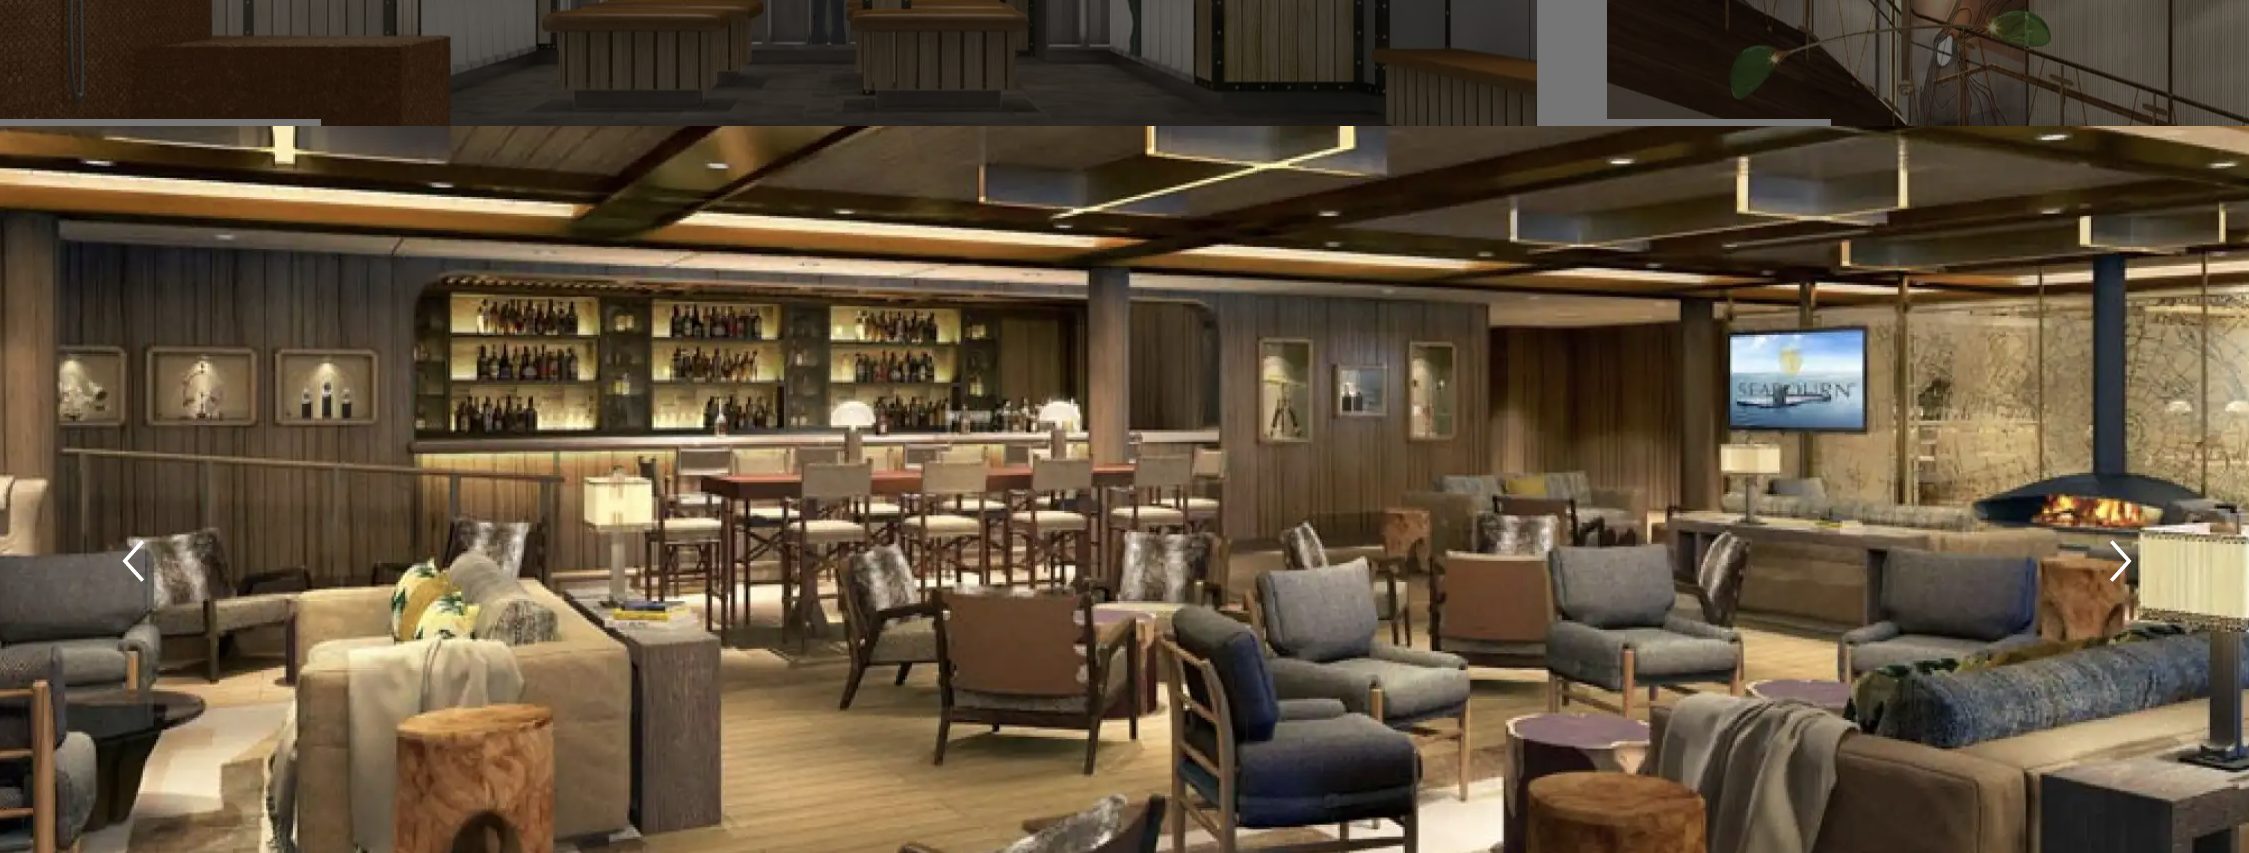 Rendering of the Expedition Lounge onboard the Seabourn Pursuit